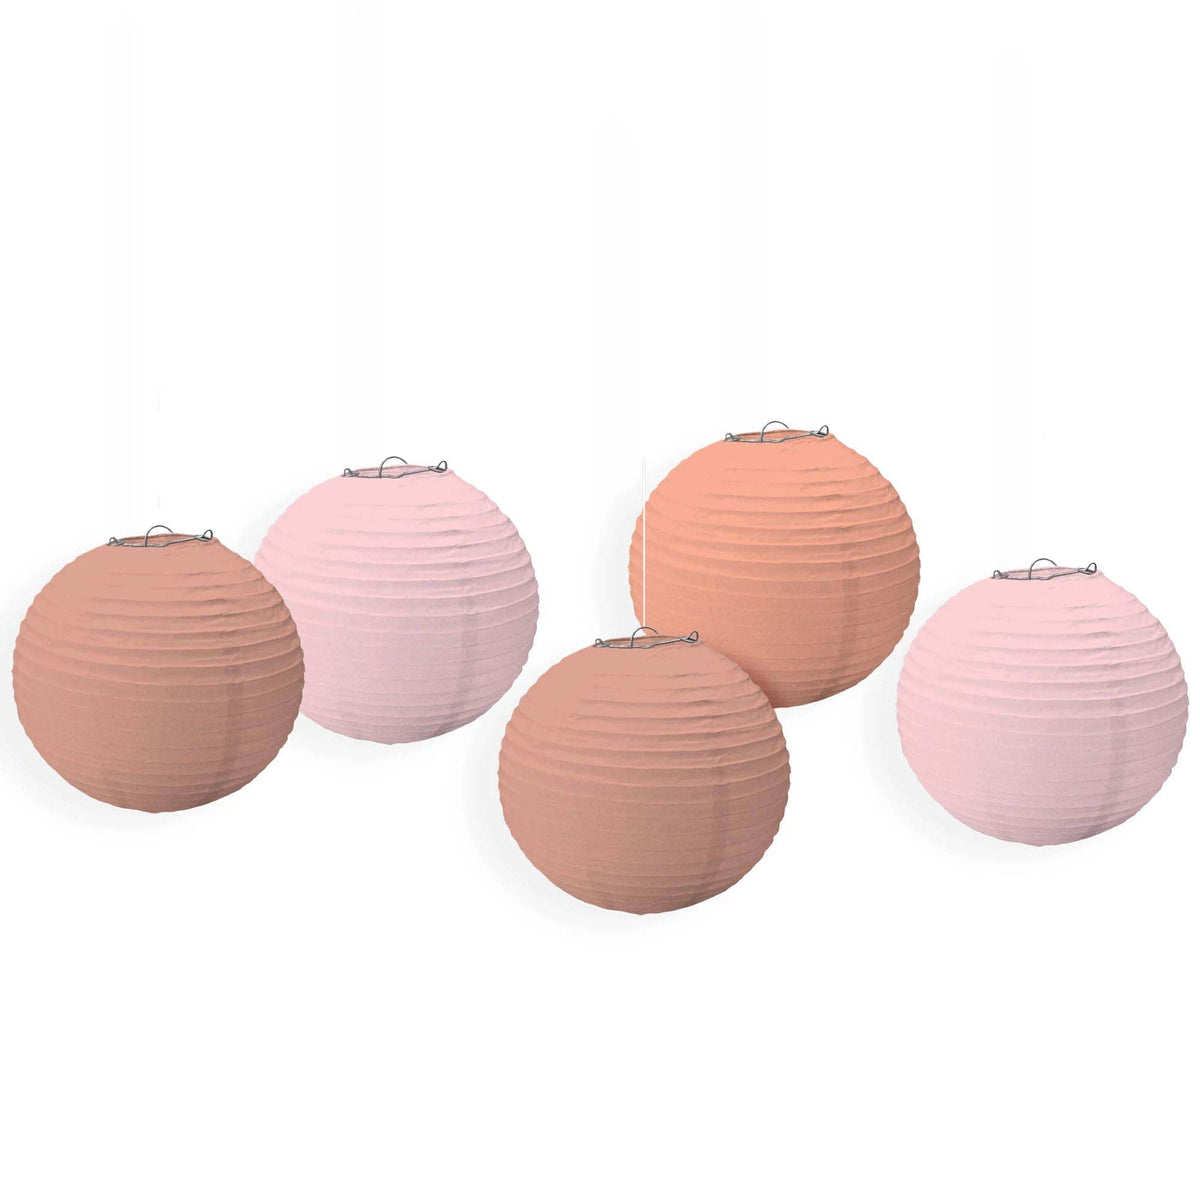 AMSCAN CA Decorations Hanging Mini Paper Lanterns, Rose Gold & Blush, 5 Inches, 5 Count 192937344477